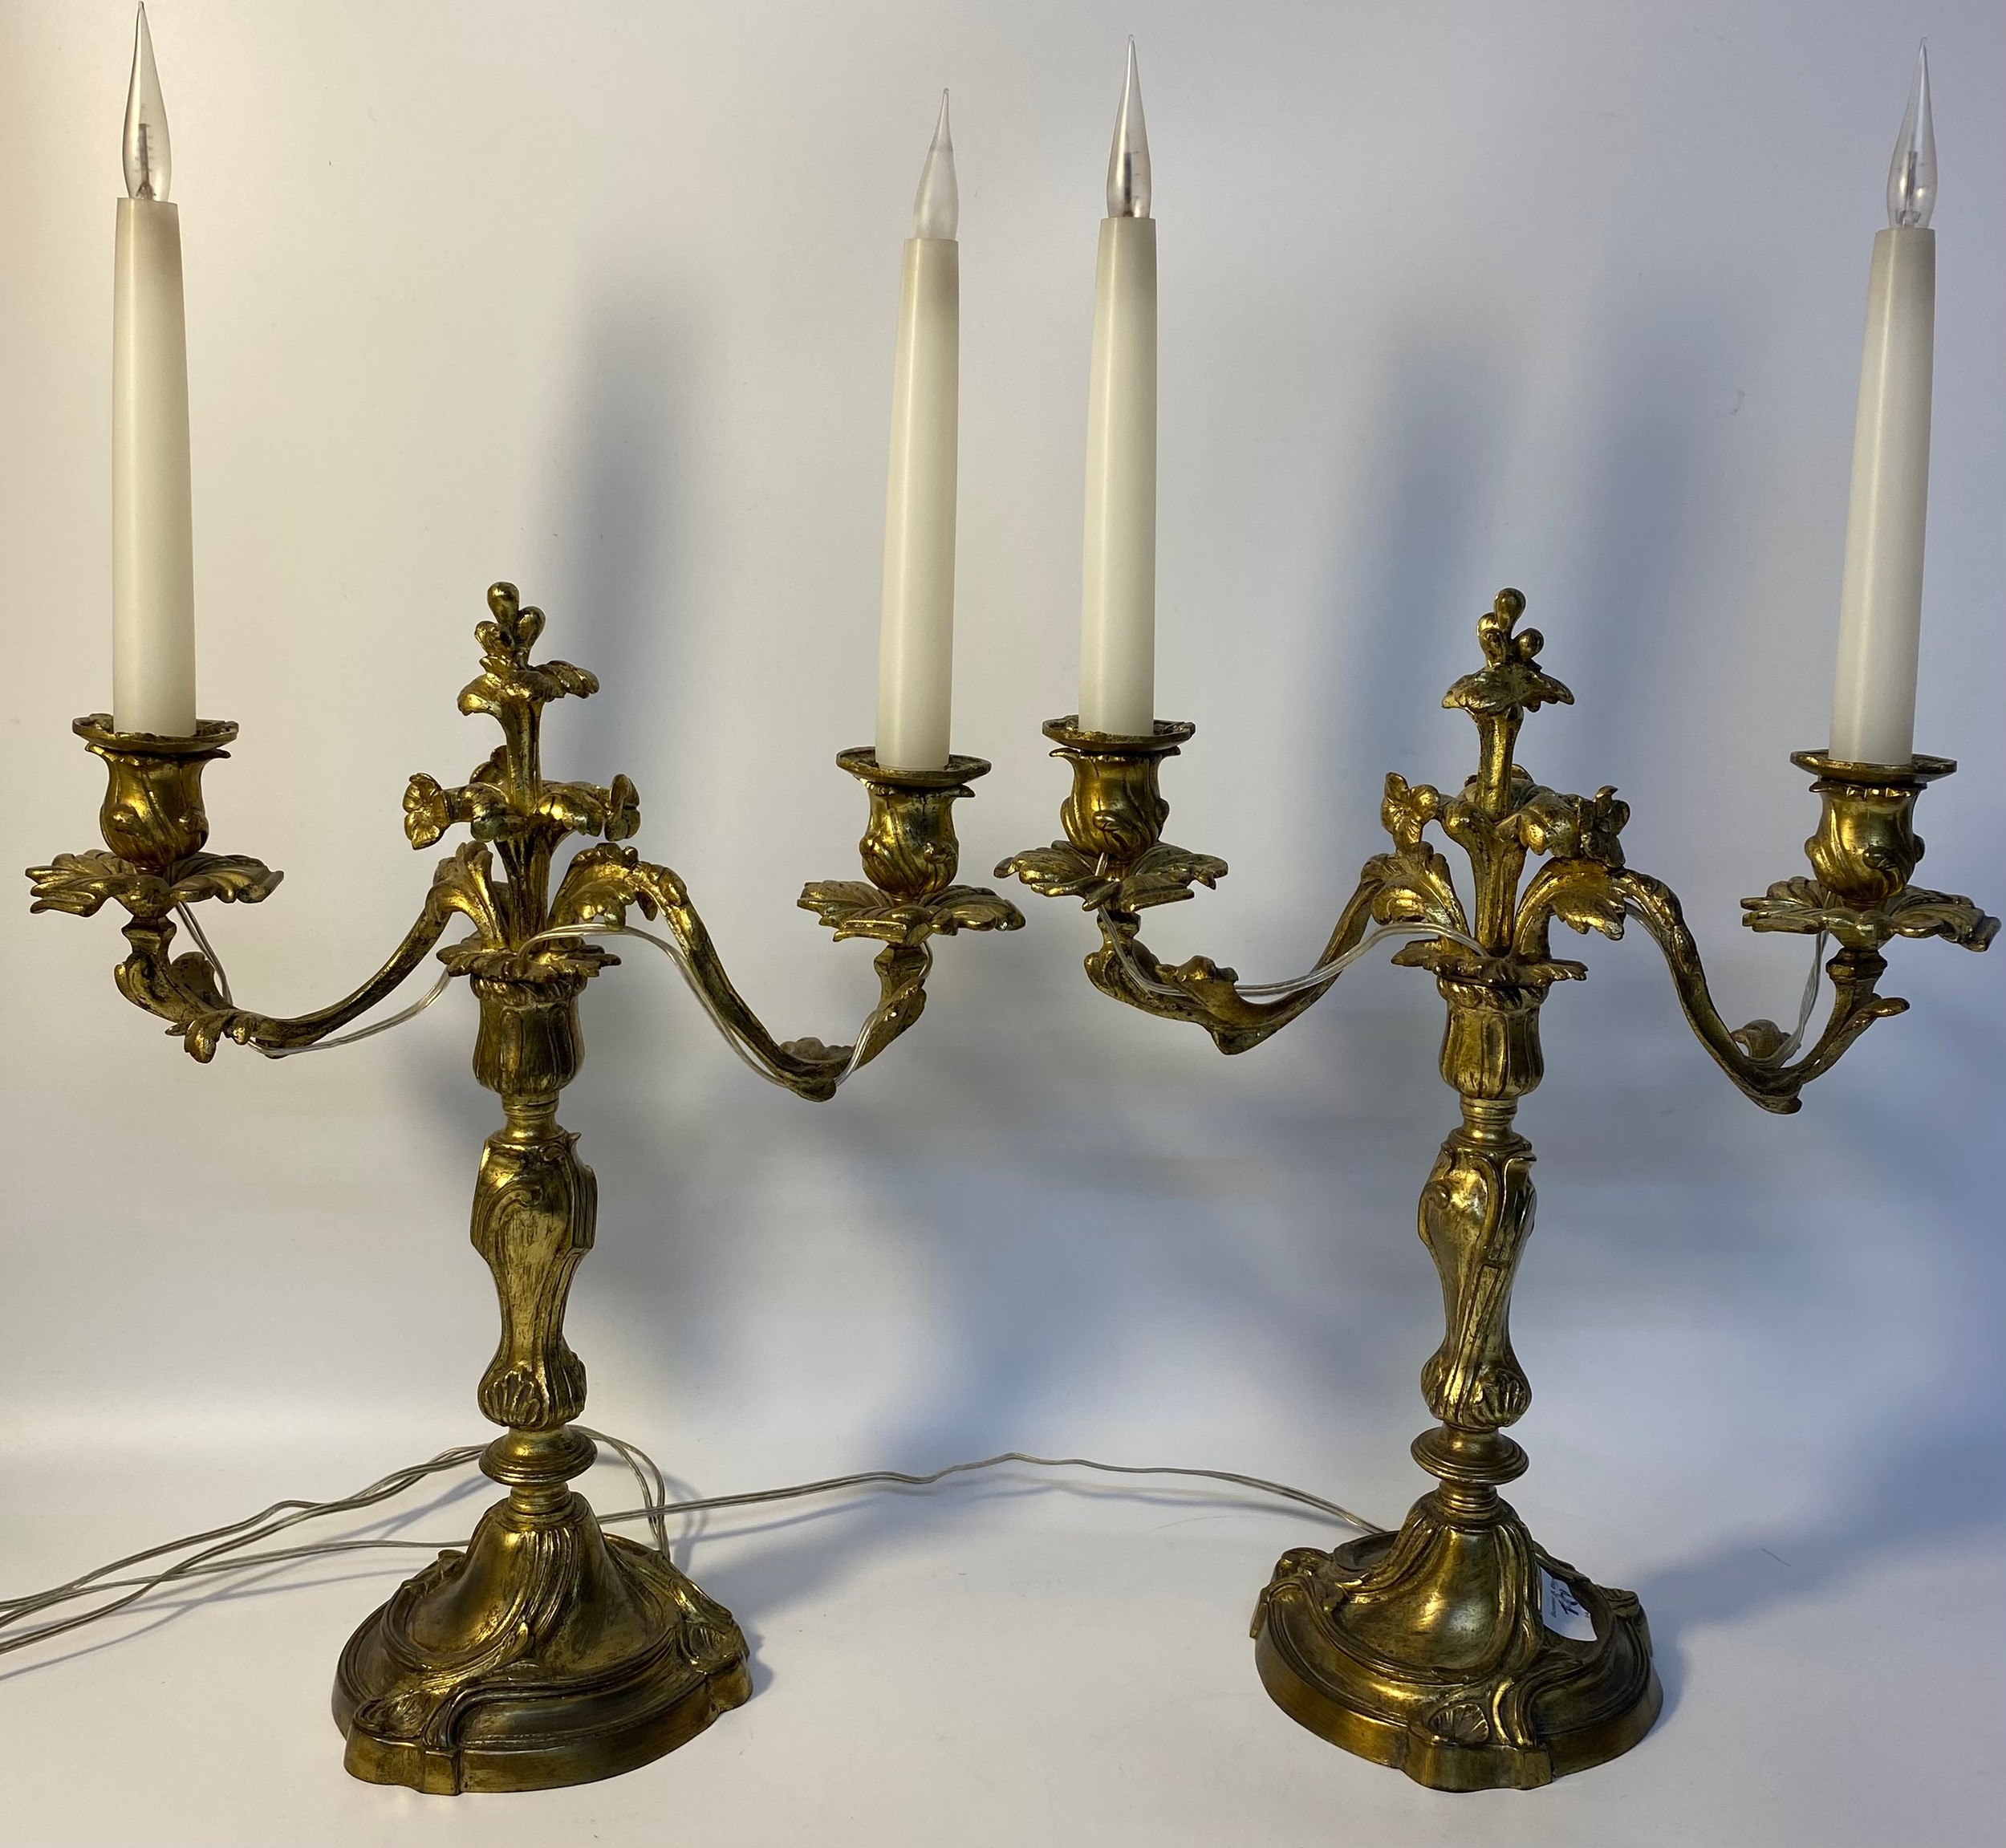 Pair of 19th century heavy brass Candelabras converted to electric [38cm]